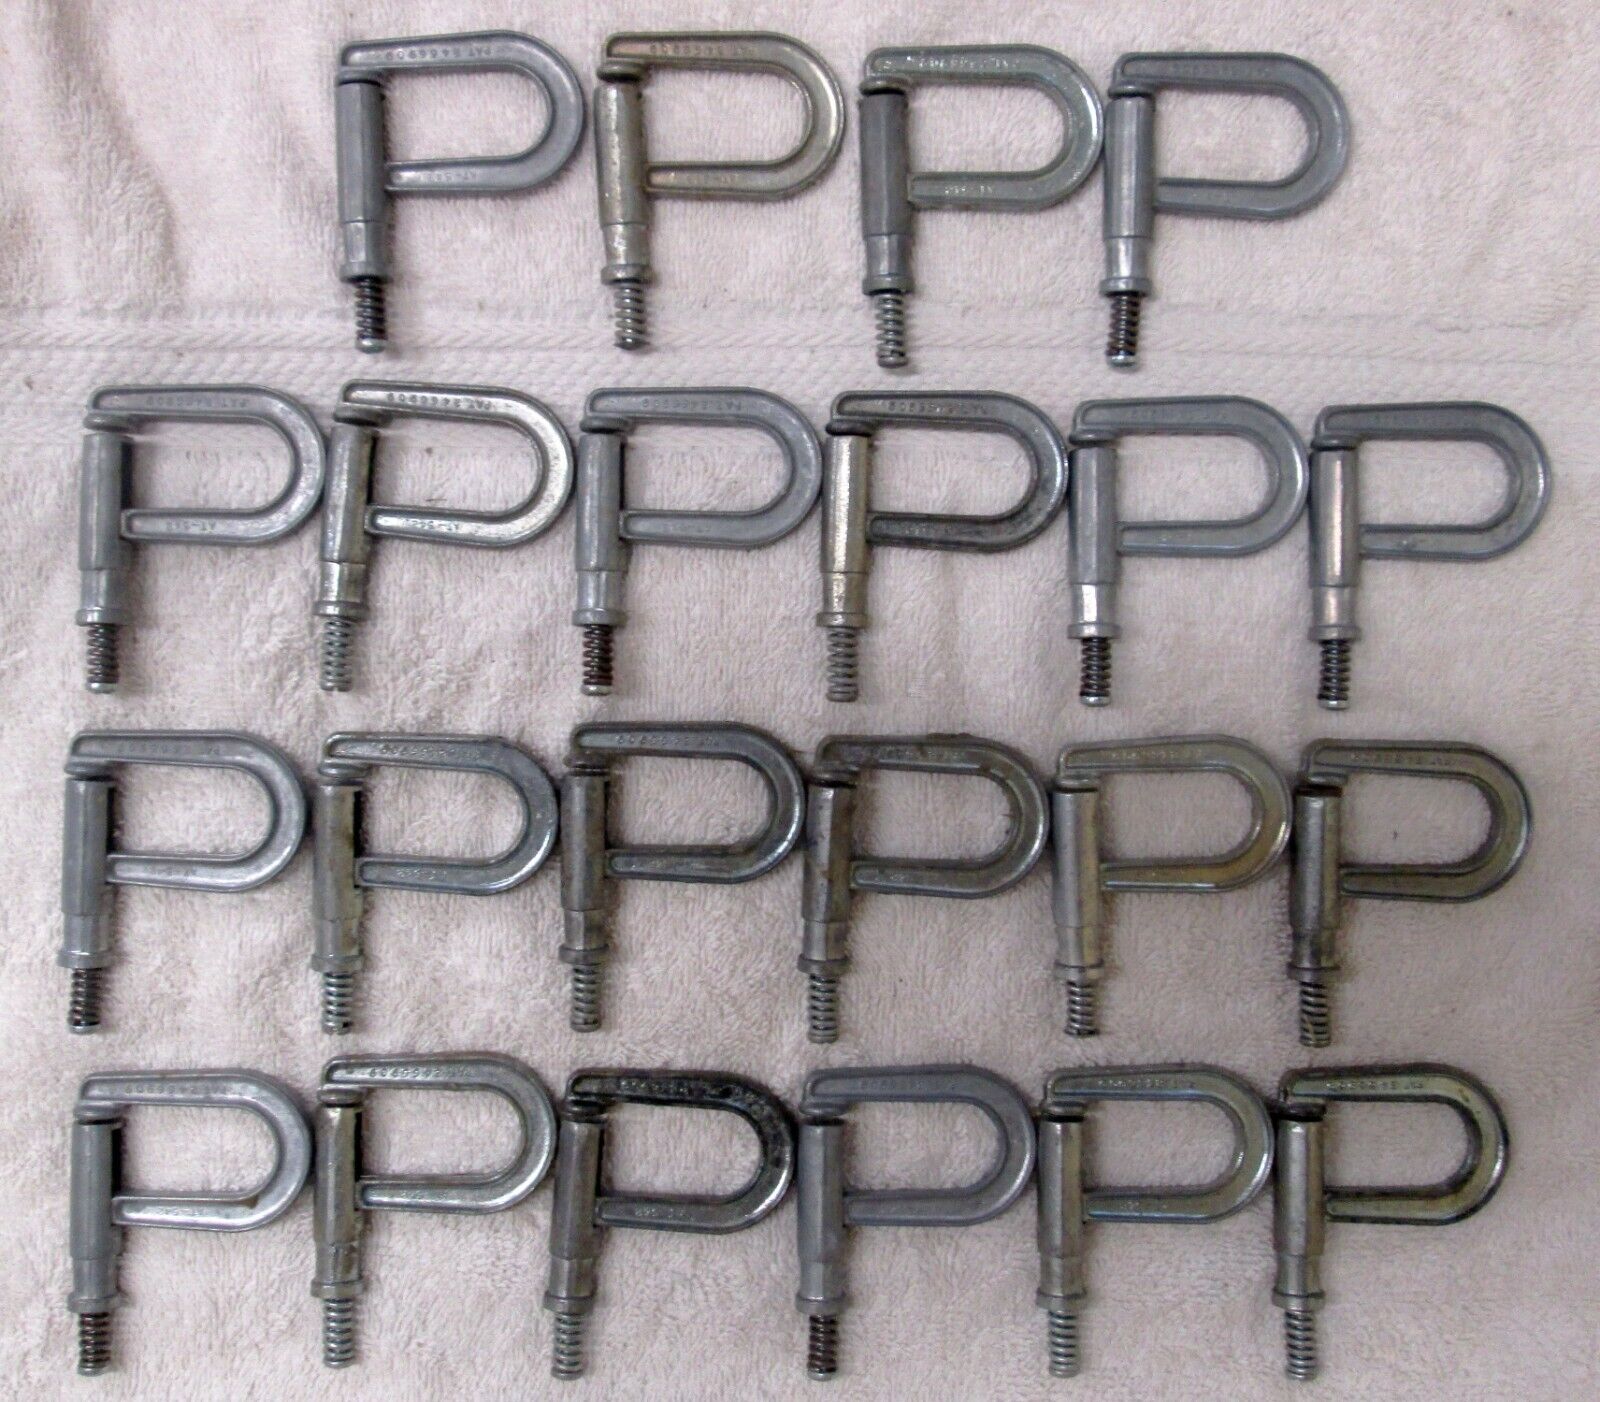 22 Spring Tension Clamps, Vintage Aircraft Tools, AT-542 1¾